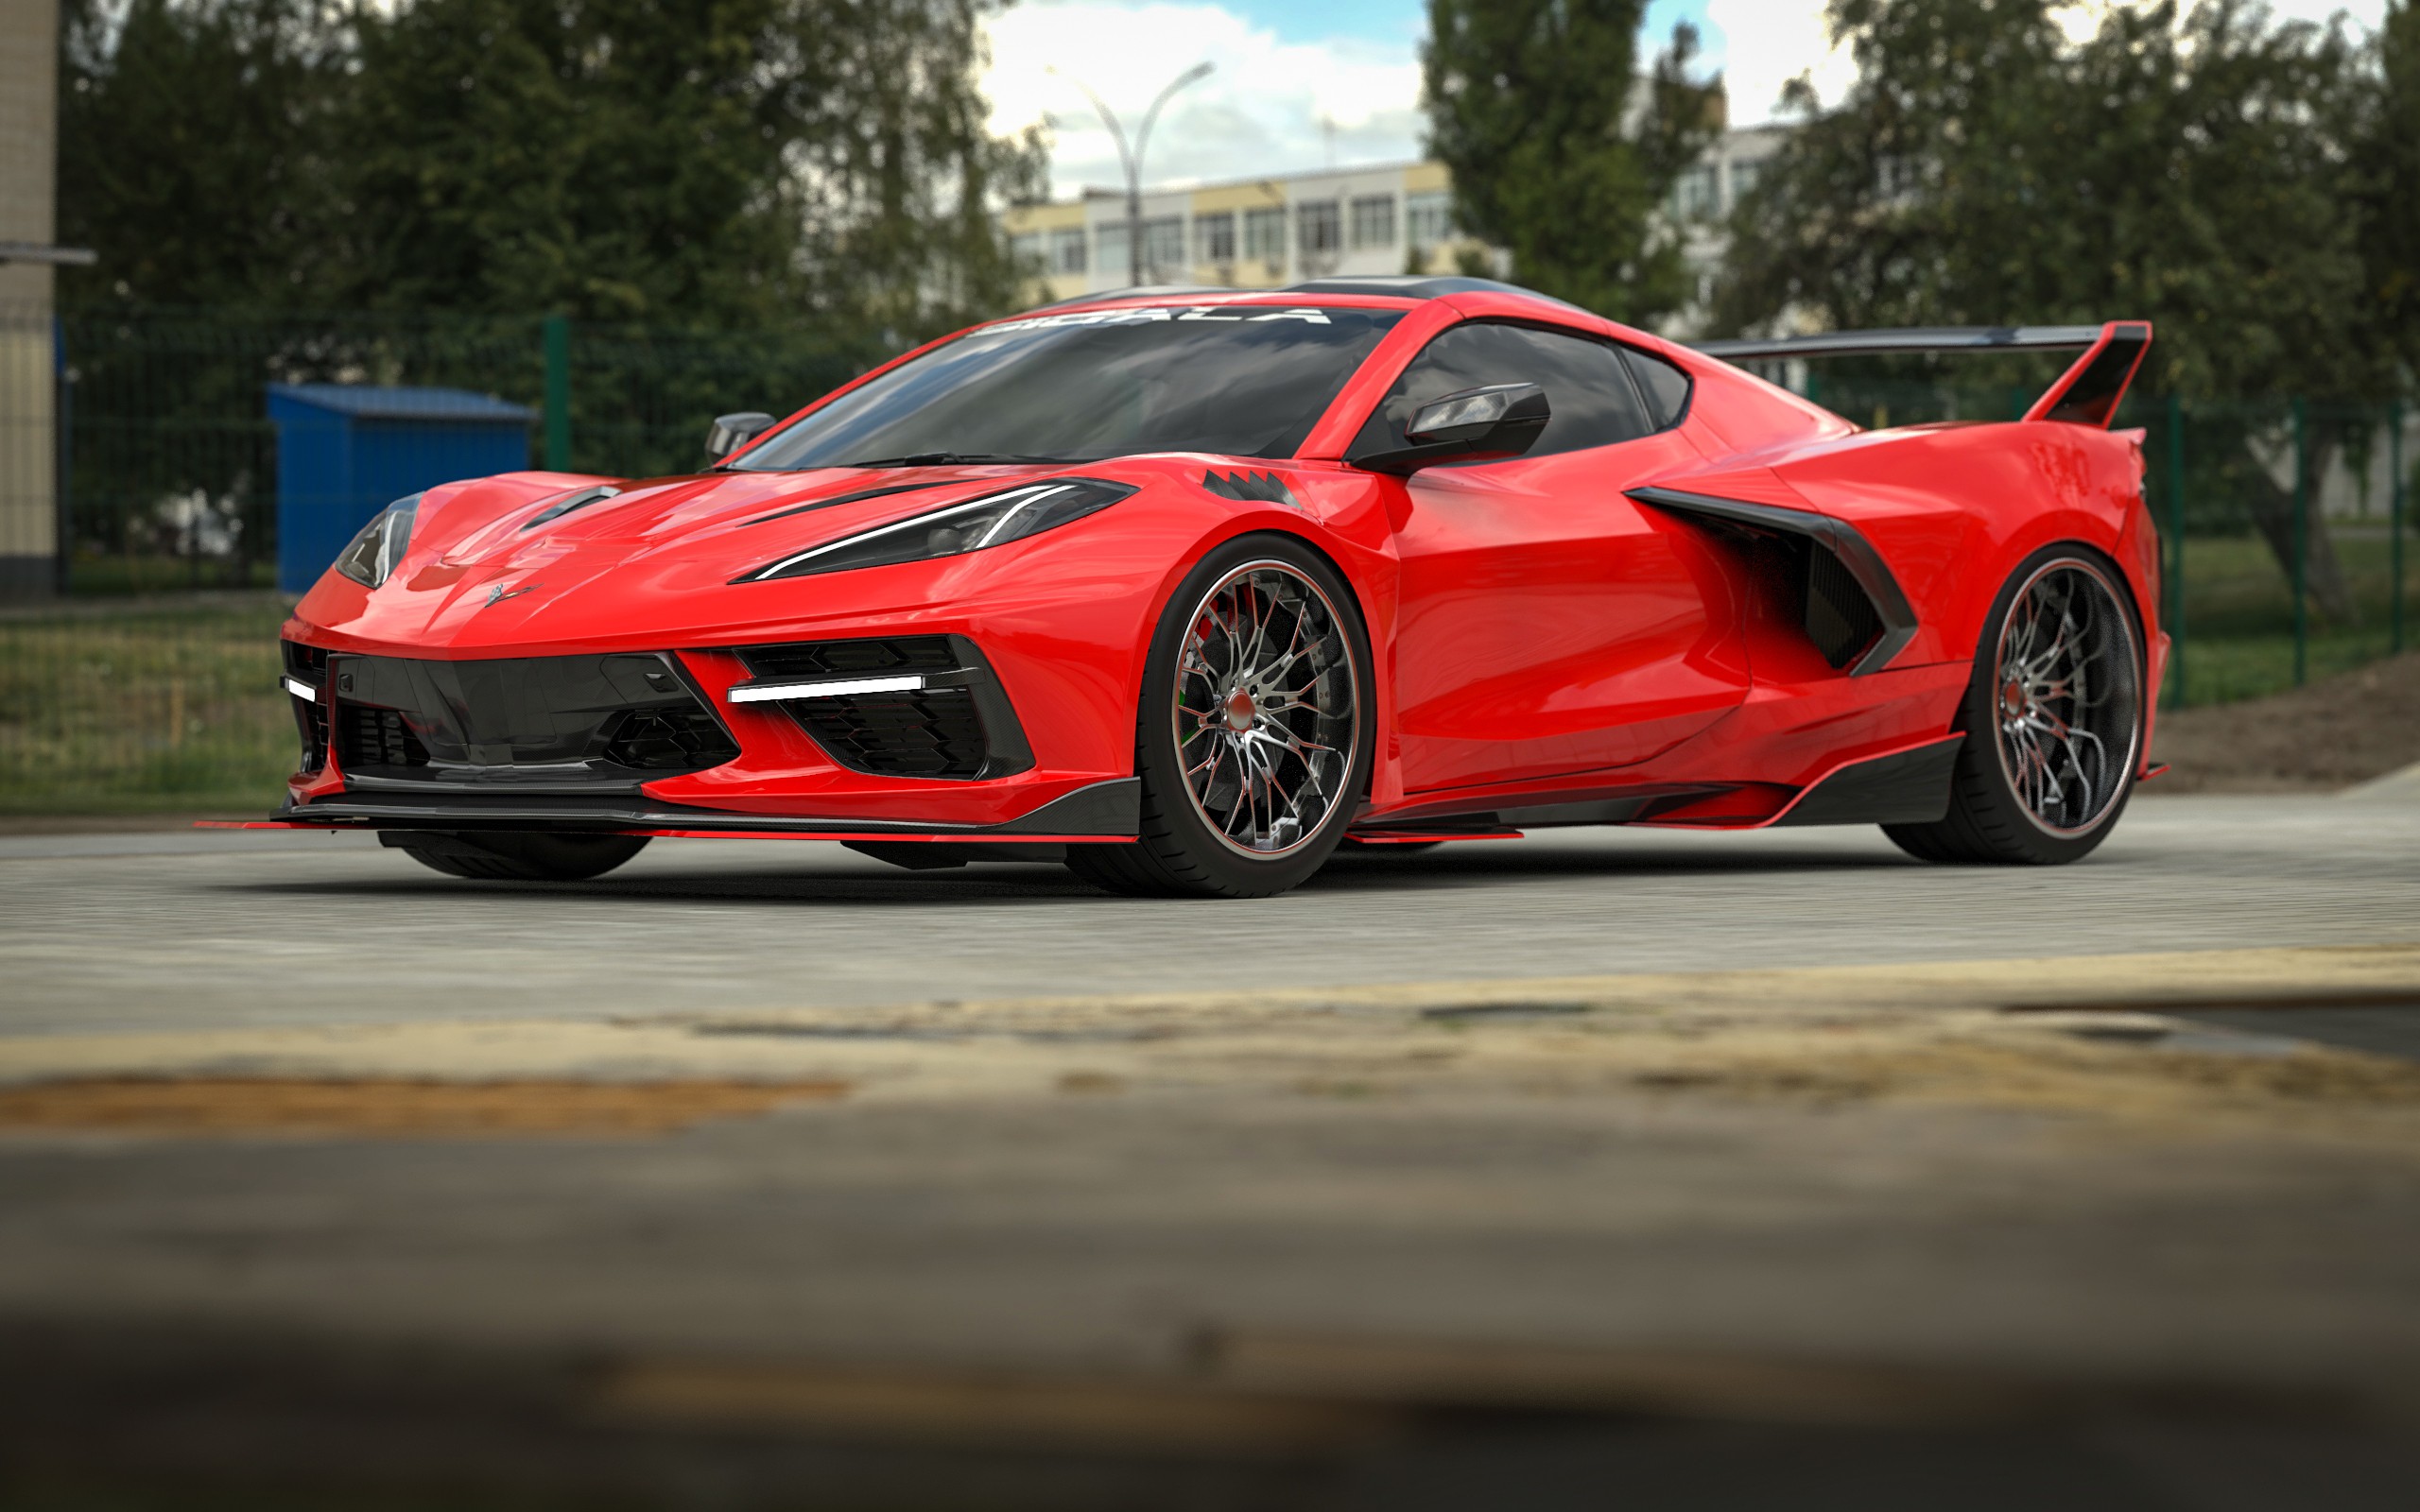 Widebody C8 Corvette “c8rr” By Sigala Designs Looks Awesome Coming